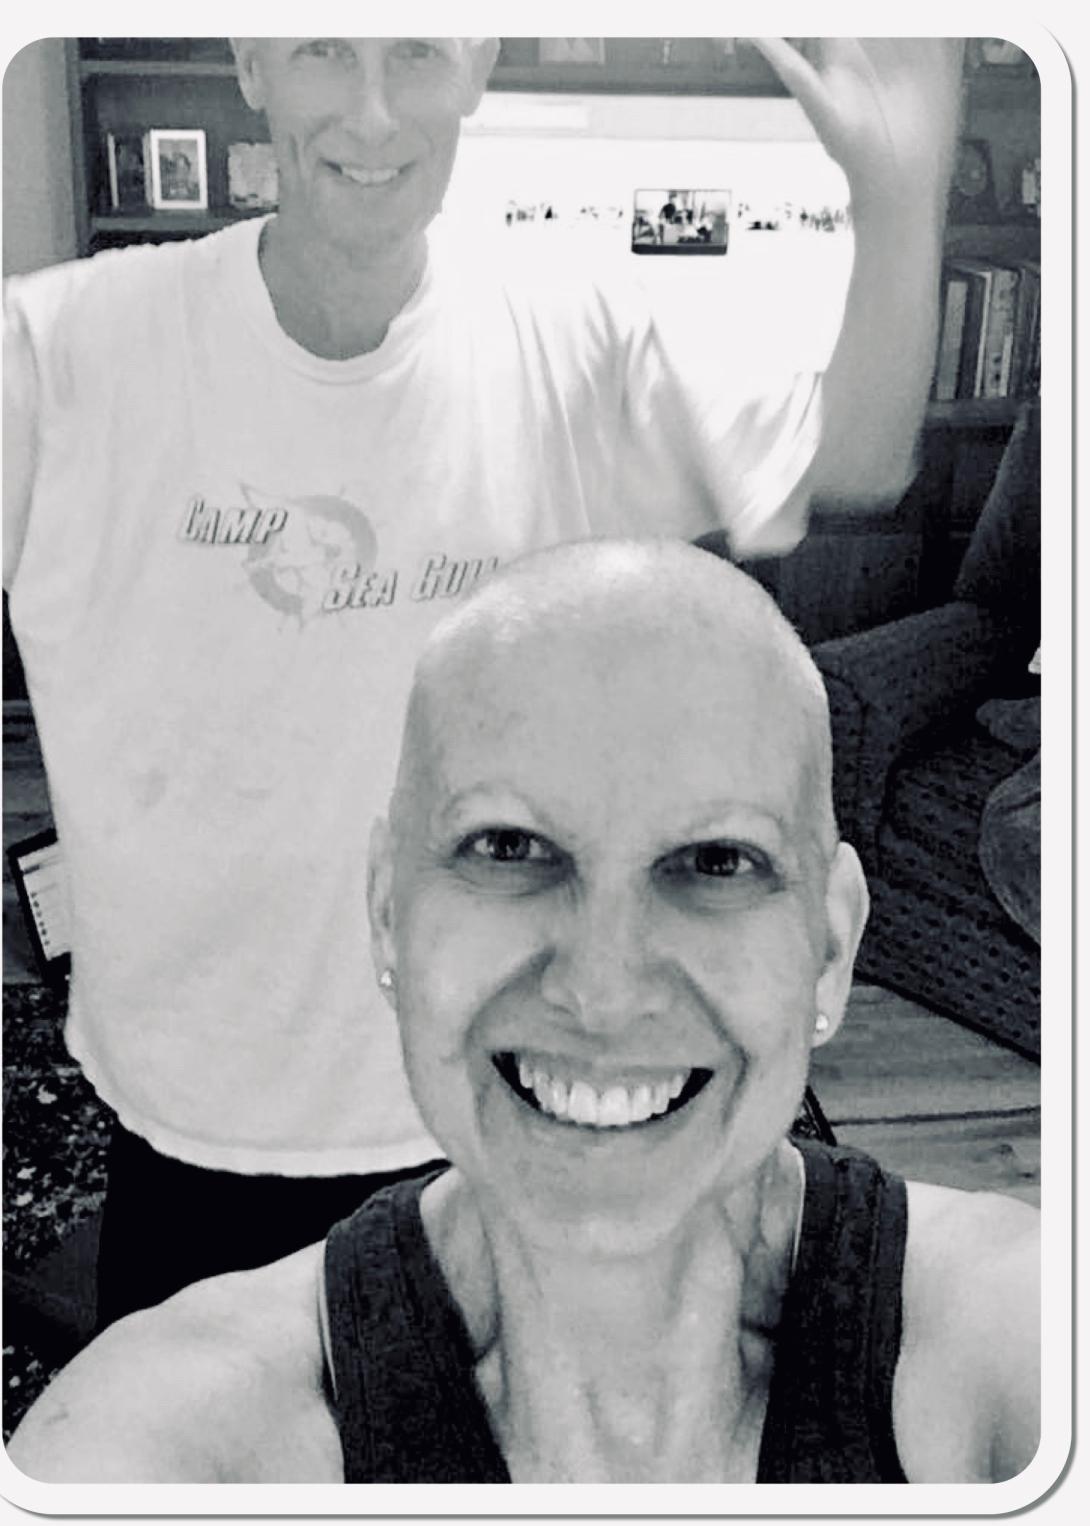 In this black and white photo, a bald Kathy Jennings smiles in a selfie with her husband in the background.